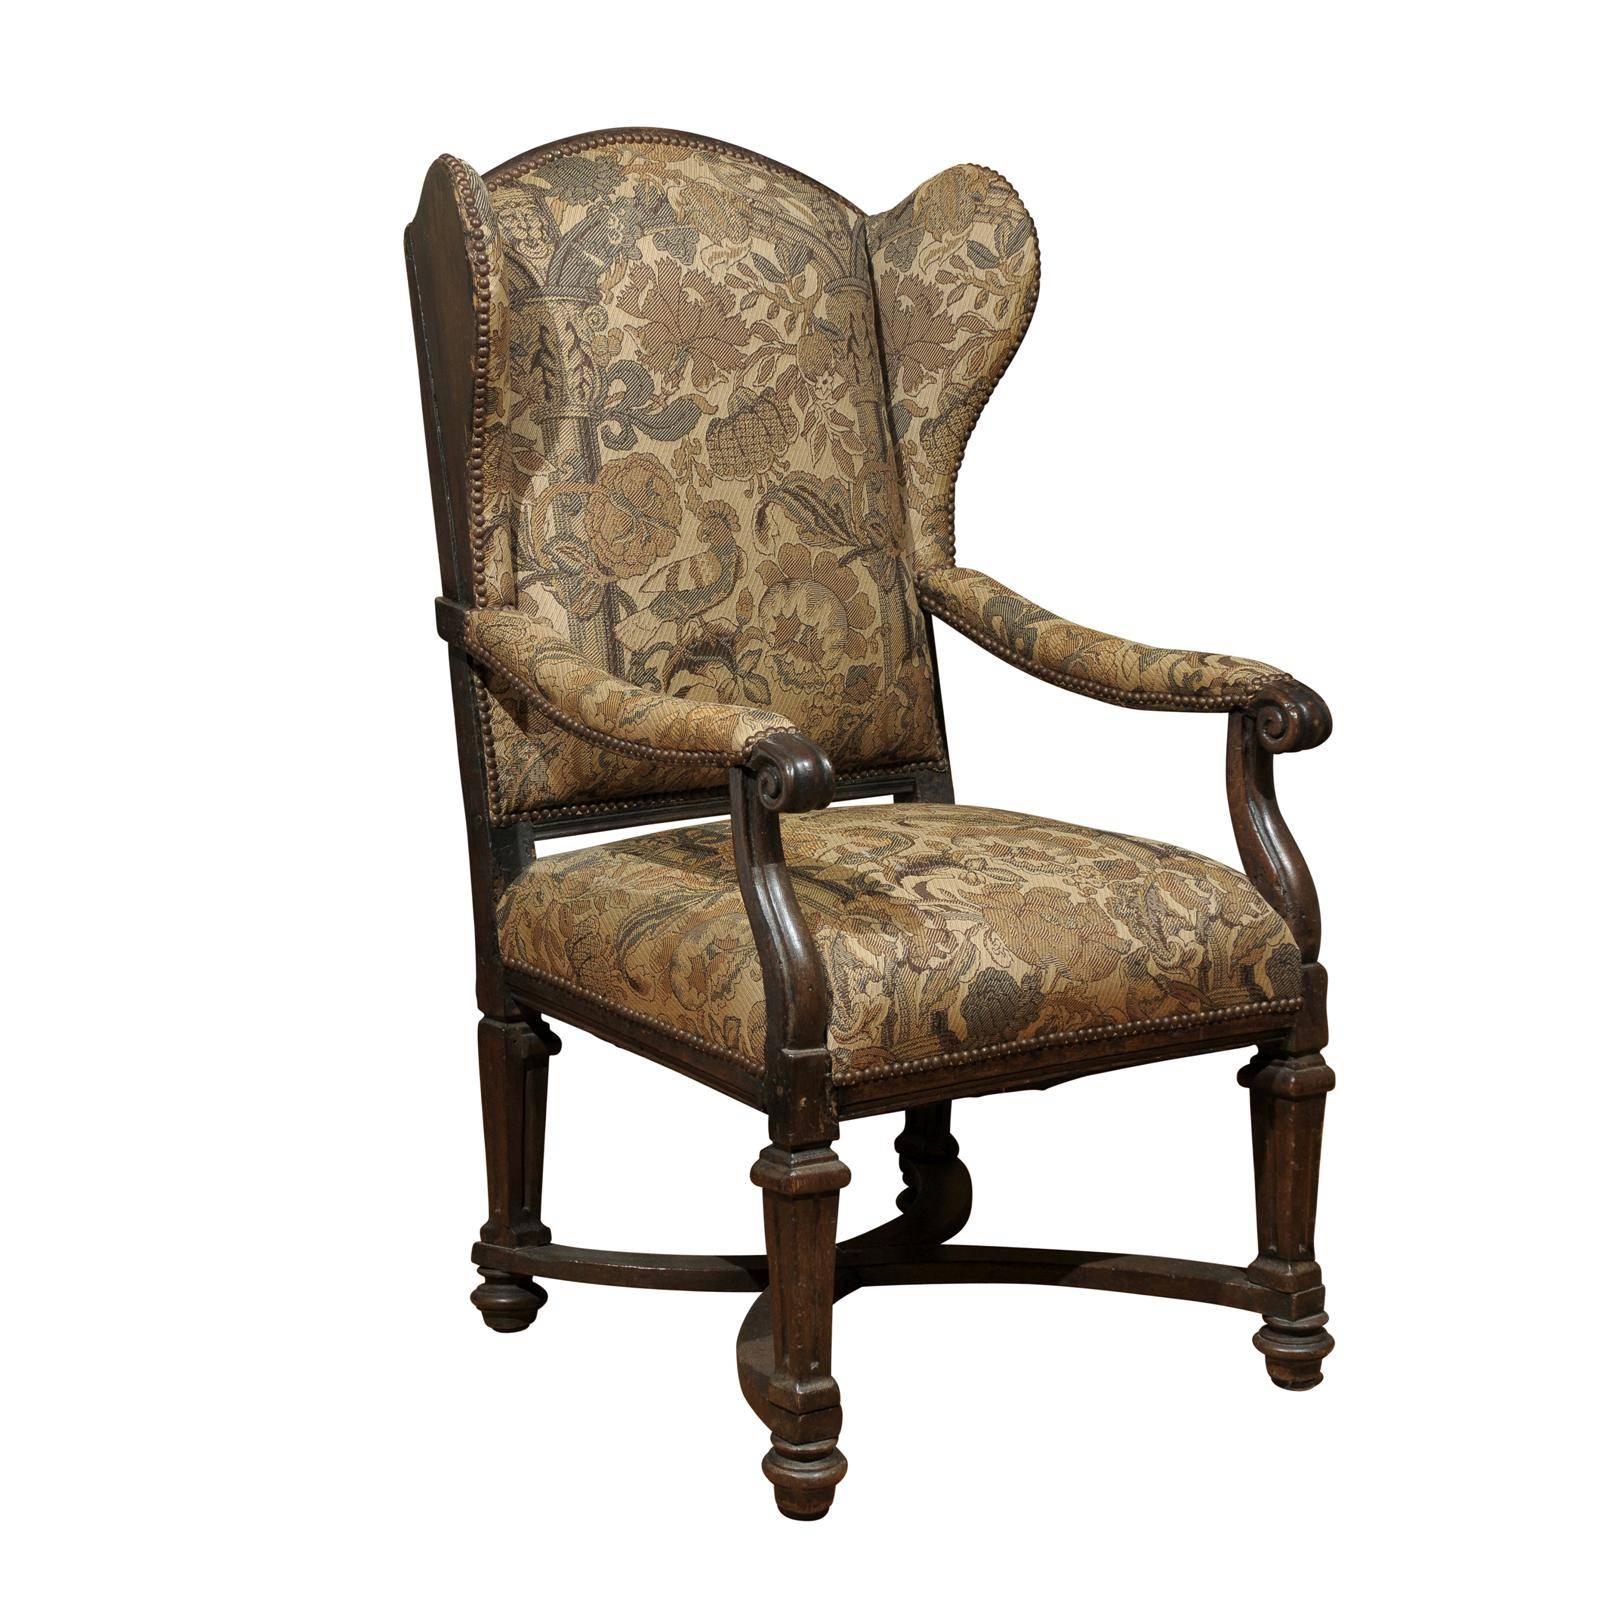 18th Century English Upholstered Wingback Chair